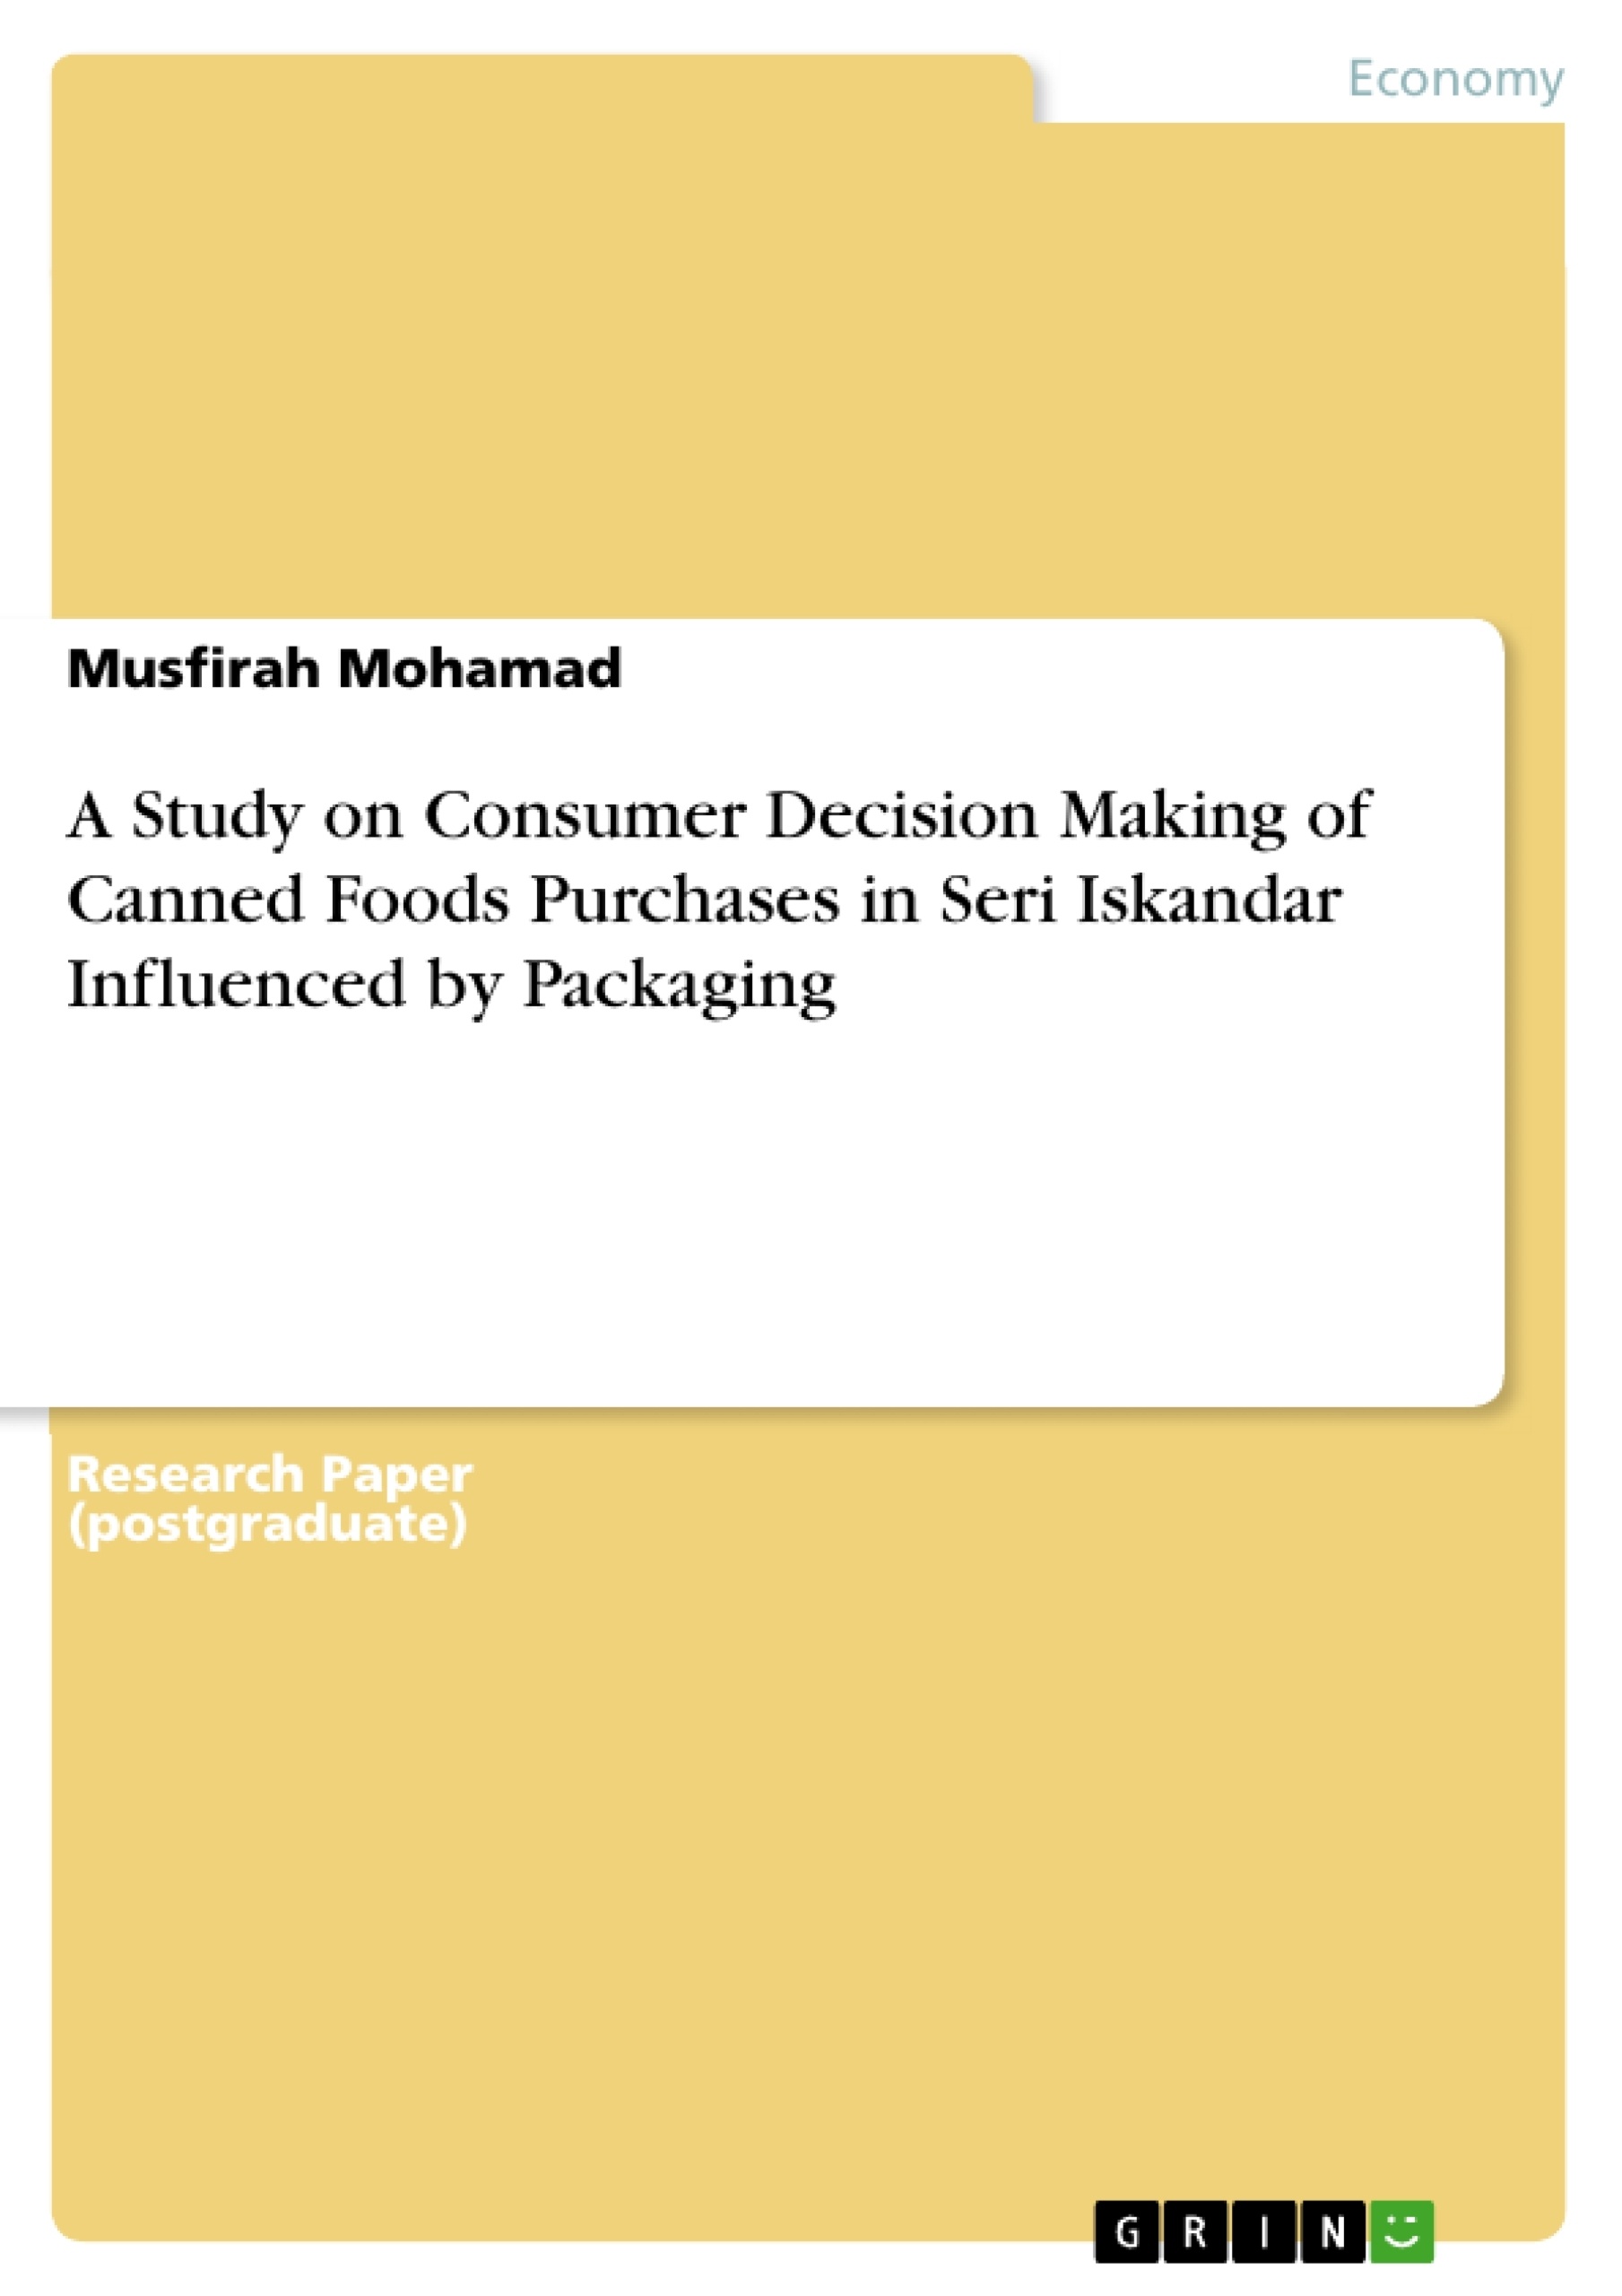 Title: A Study on Consumer Decision Making of Canned Foods Purchases in Seri Iskandar Influenced by Packaging